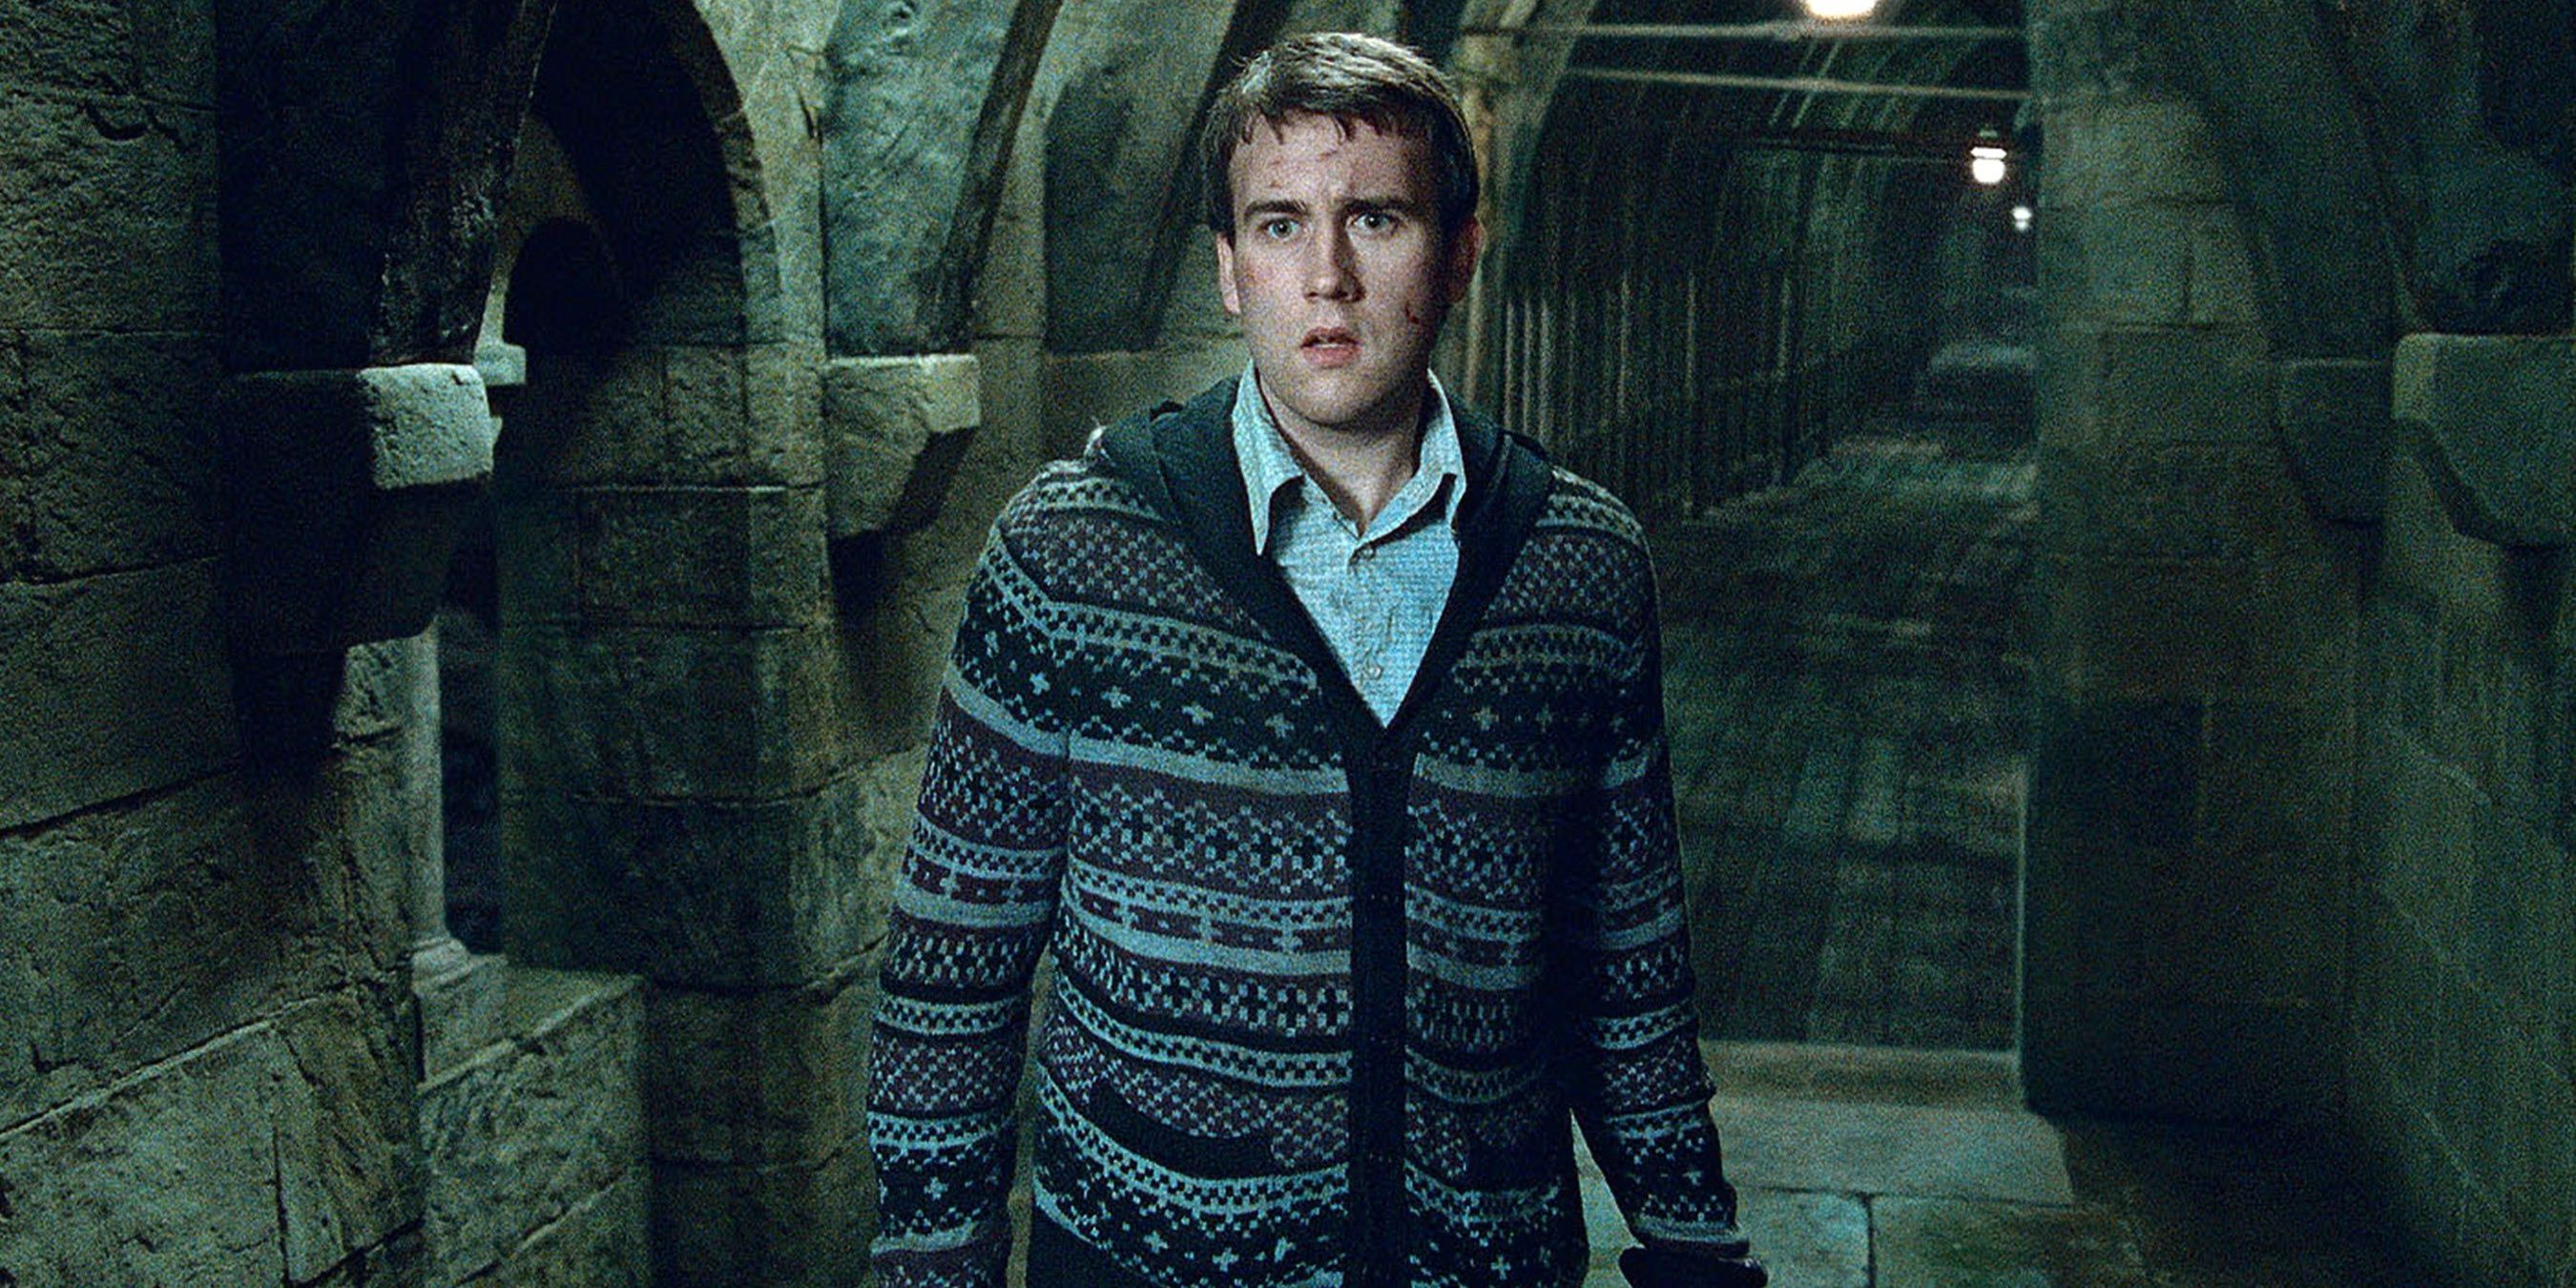 This Harry Potter Theory Solves A Big Neville Longbottom Mystery (But Makes His Story More Tragic)